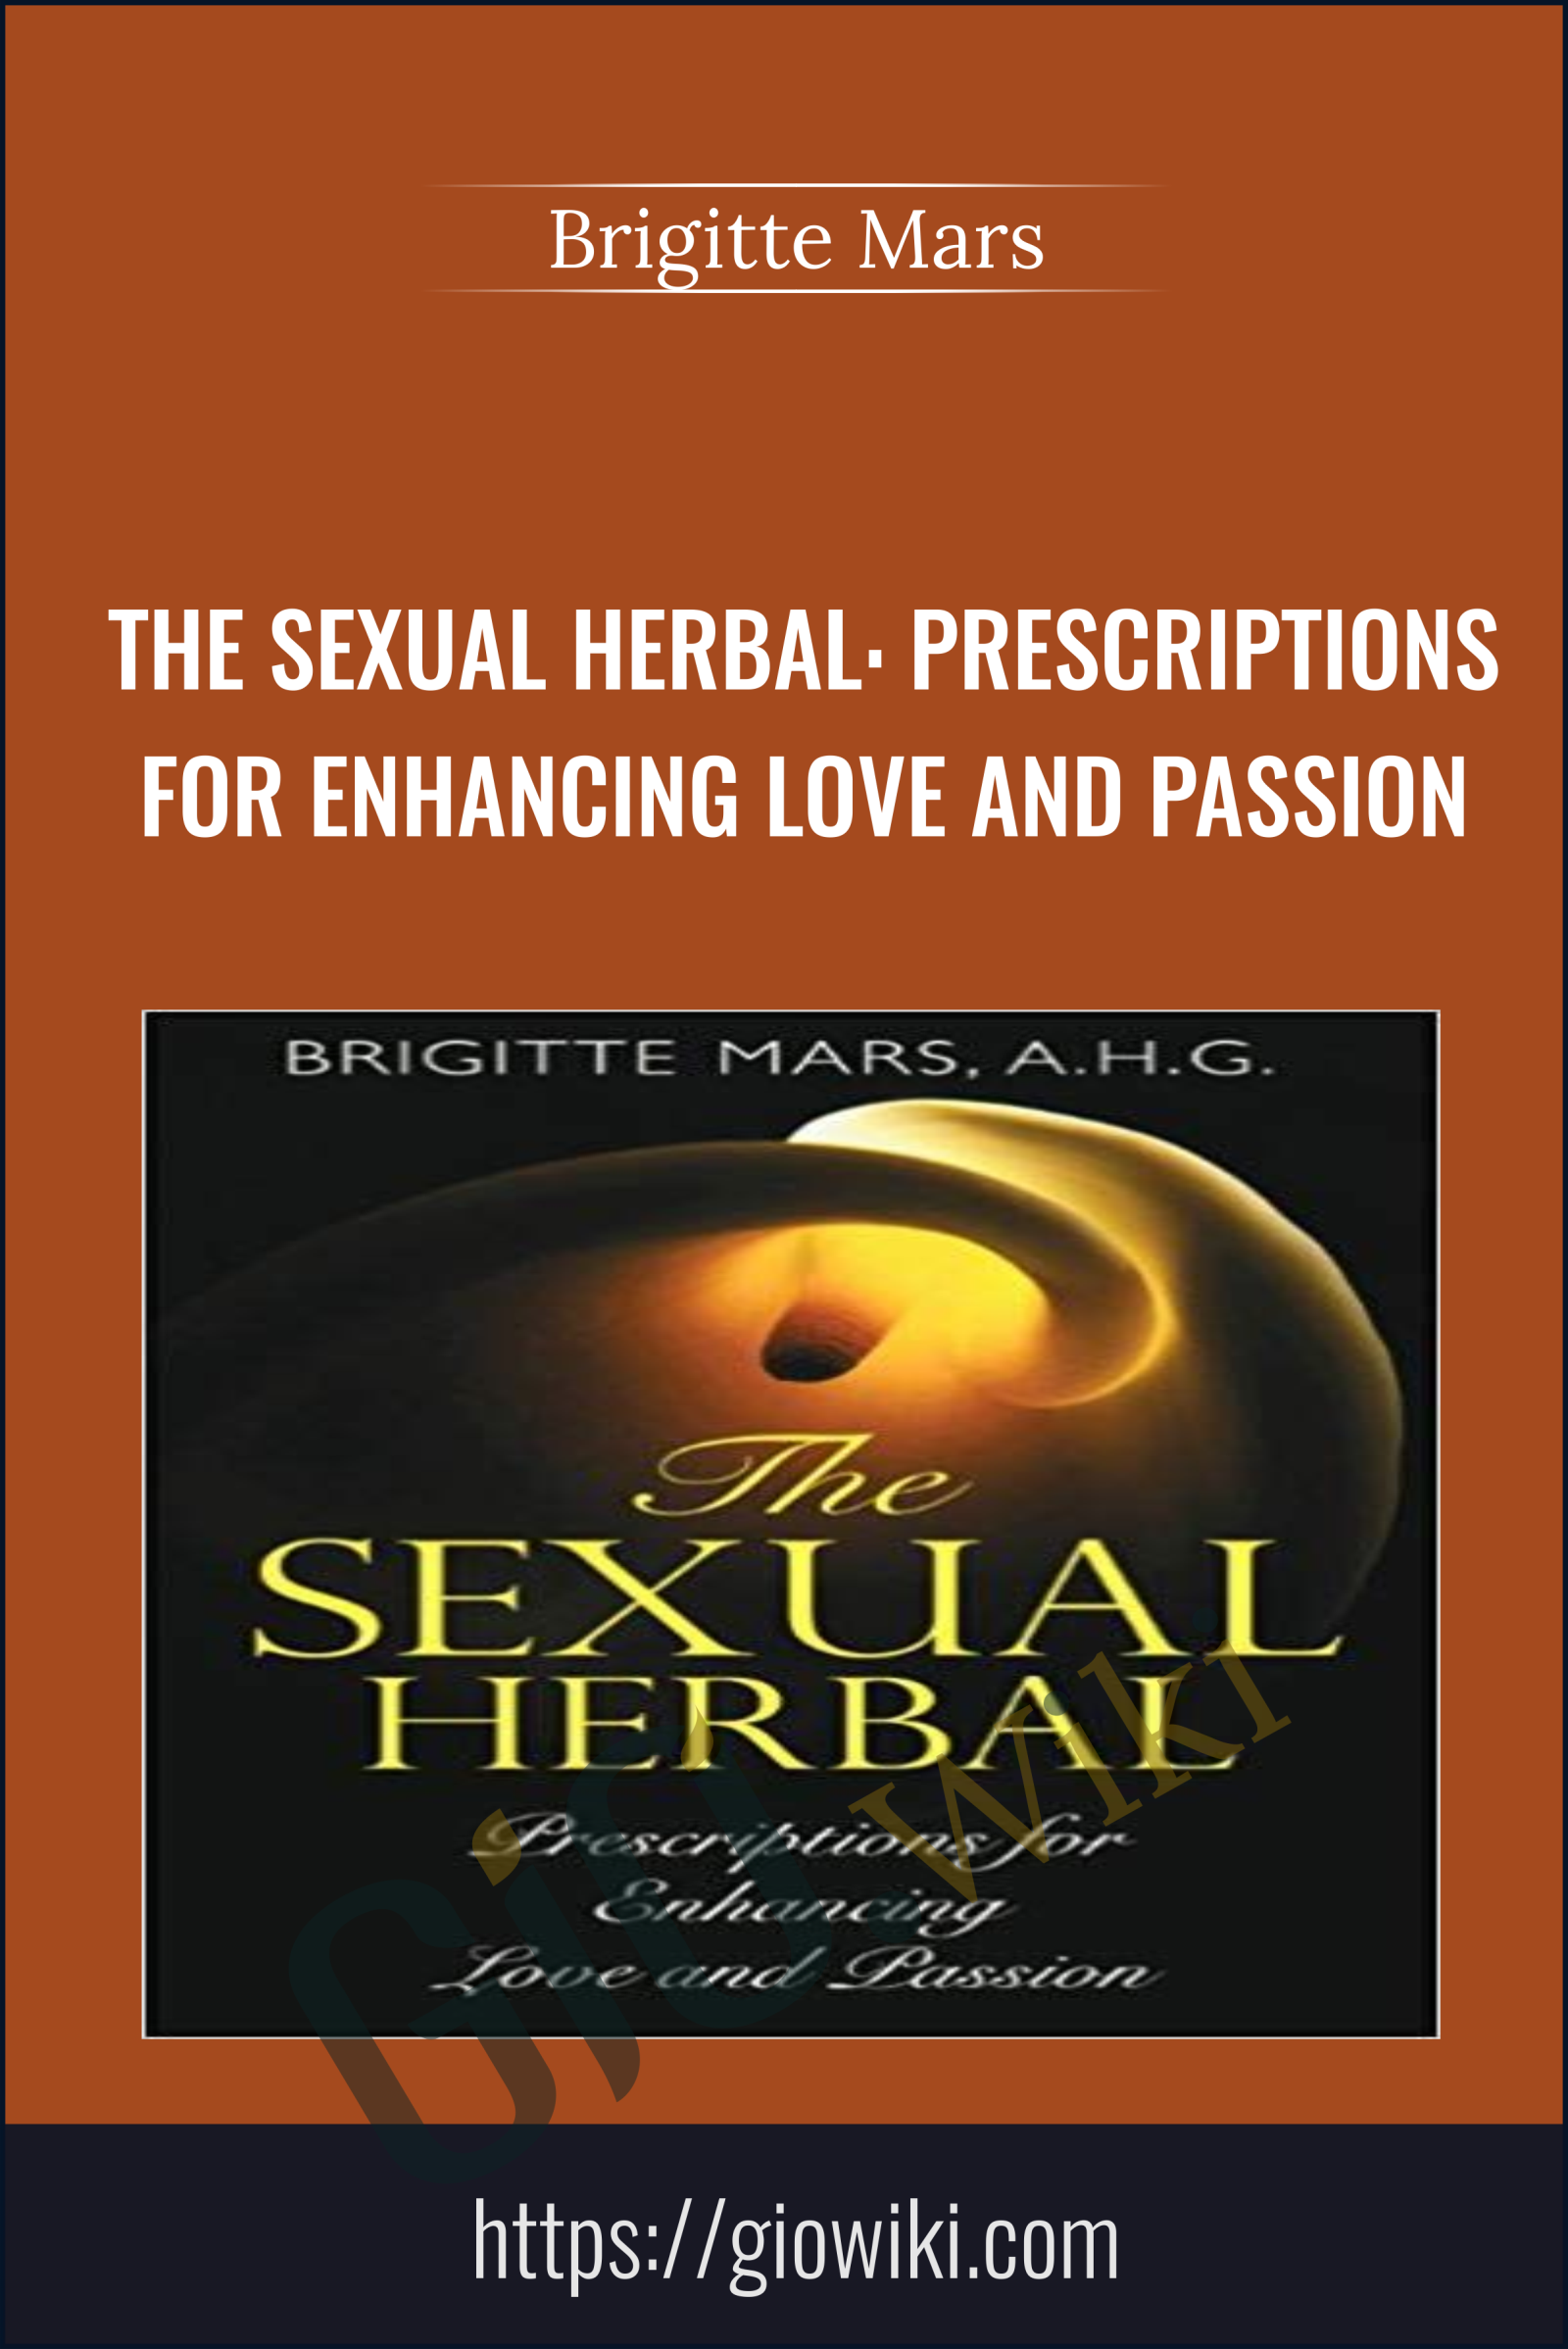 The Sexual Herbal: Prescriptions for Enhancing Love and Passion - Brigitte Mars